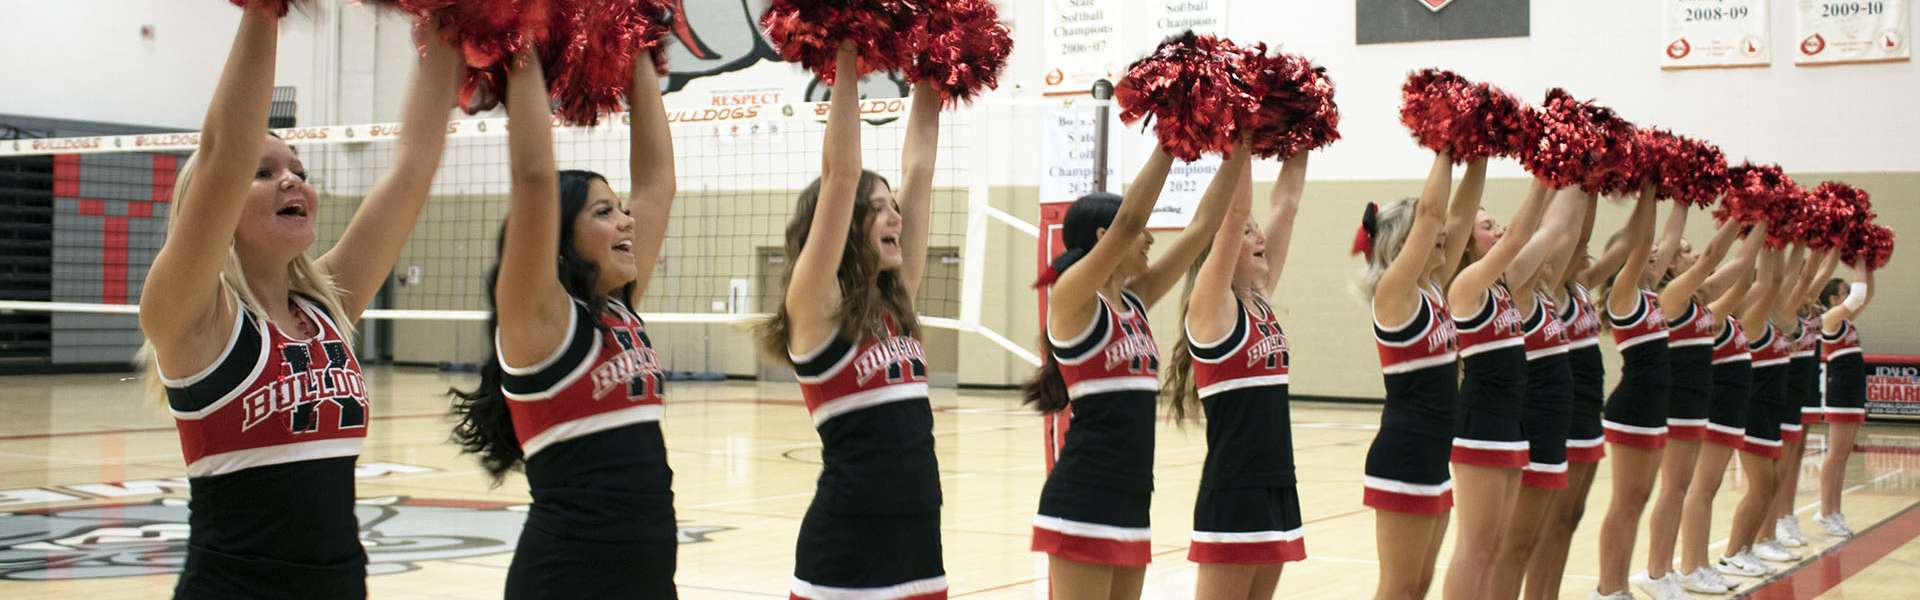 The KHS cheerleaders perform for the students during the Homecoming assembly on Friday, Sept. 9. | Photo by Jacey Cypriano